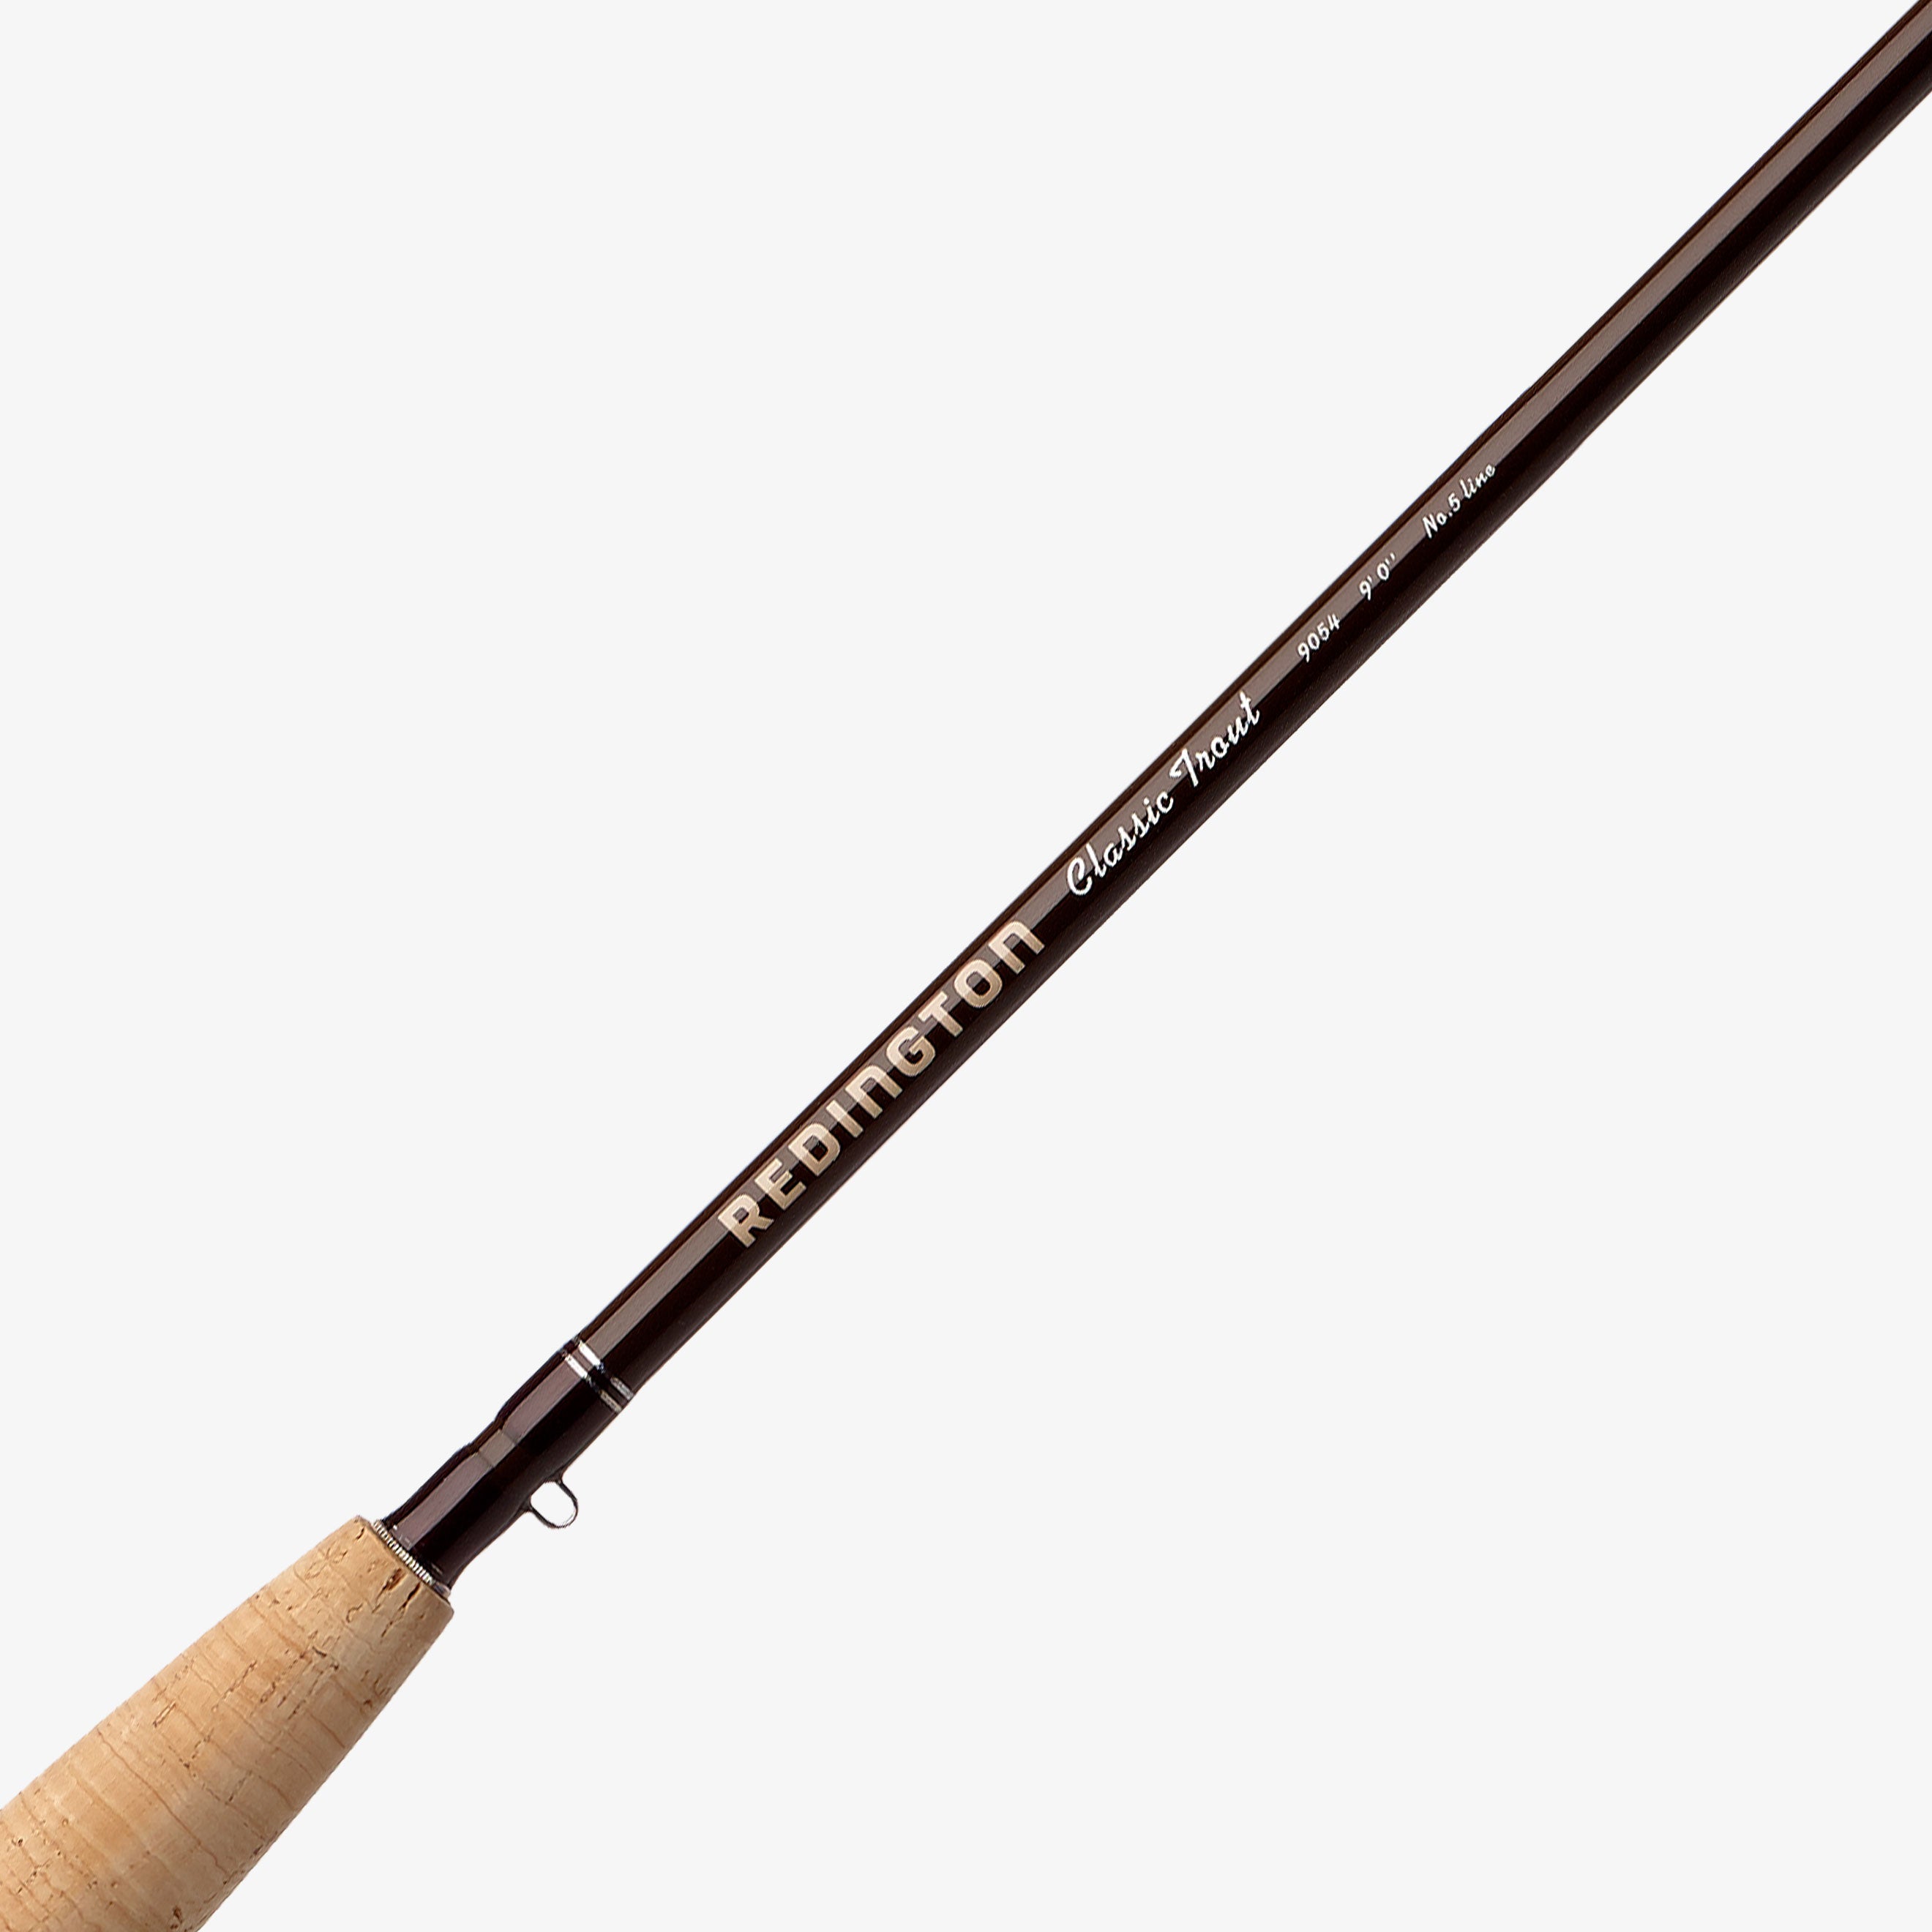 CLASSIC TROUT Fly Fishing Rod 4 Weight, 8ft 6in